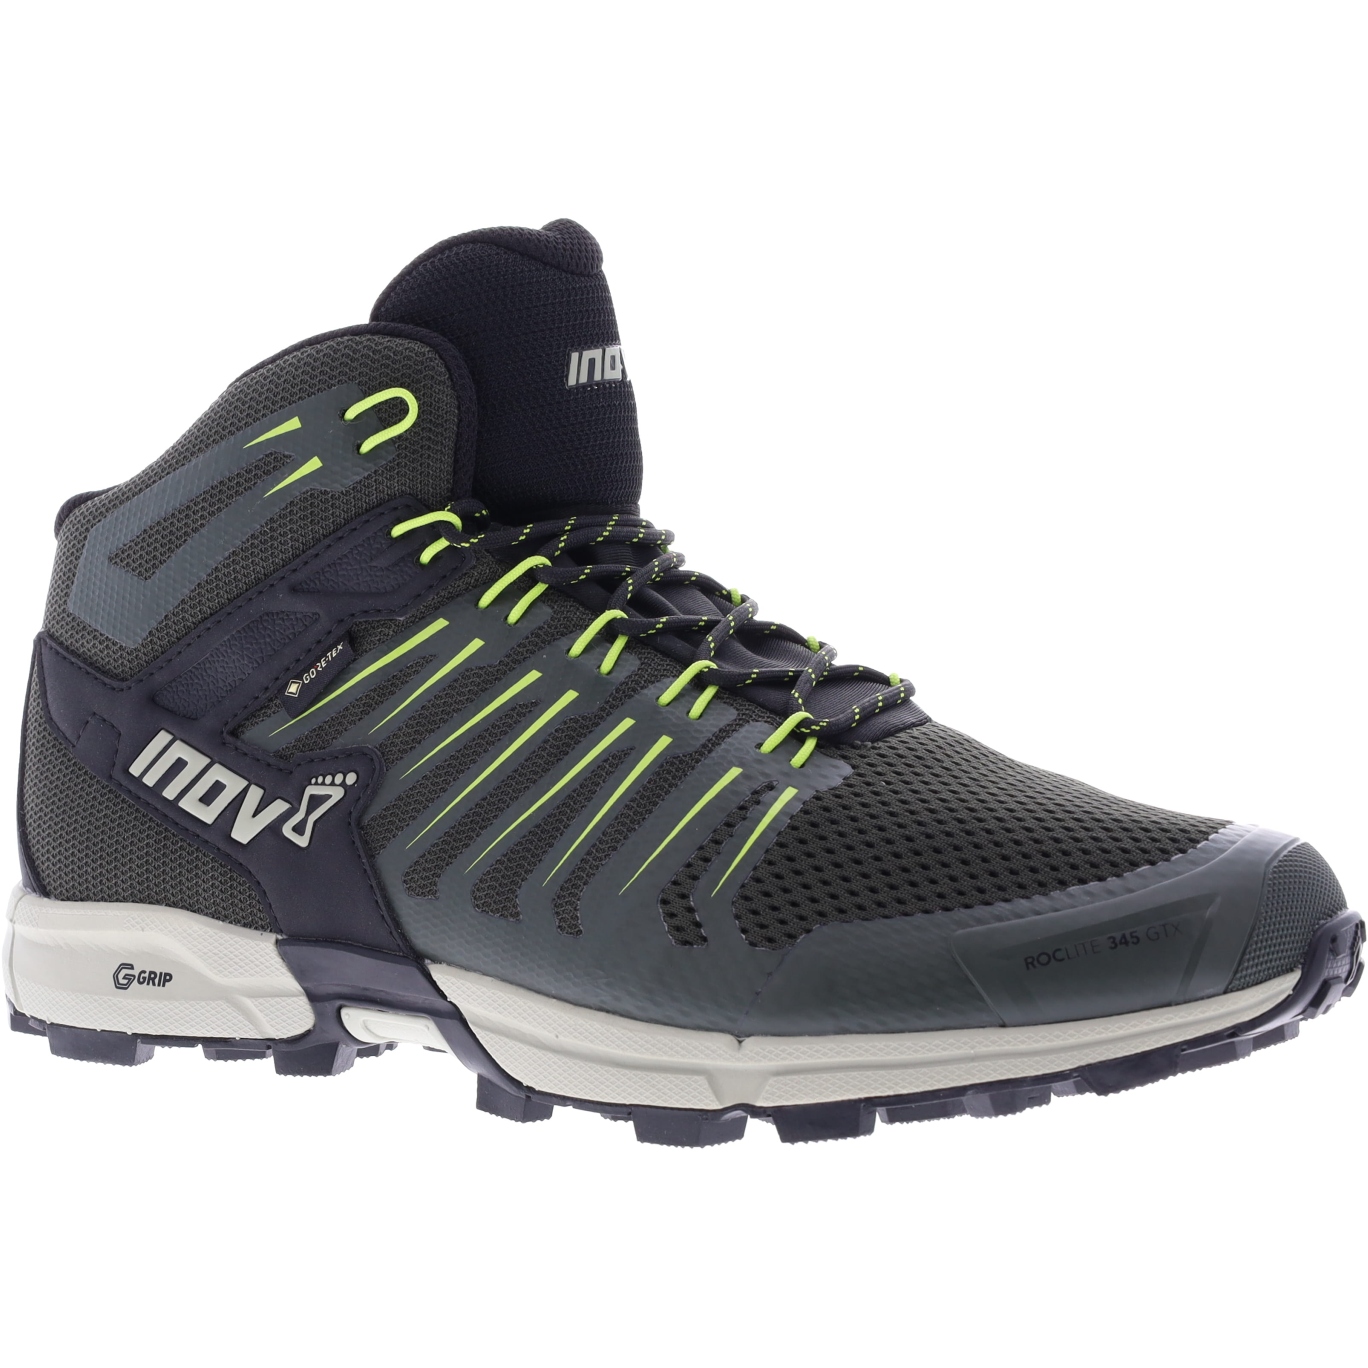 Picture of Inov-8 Roclite G 345 GTX Hiking Shoes - olive/lime